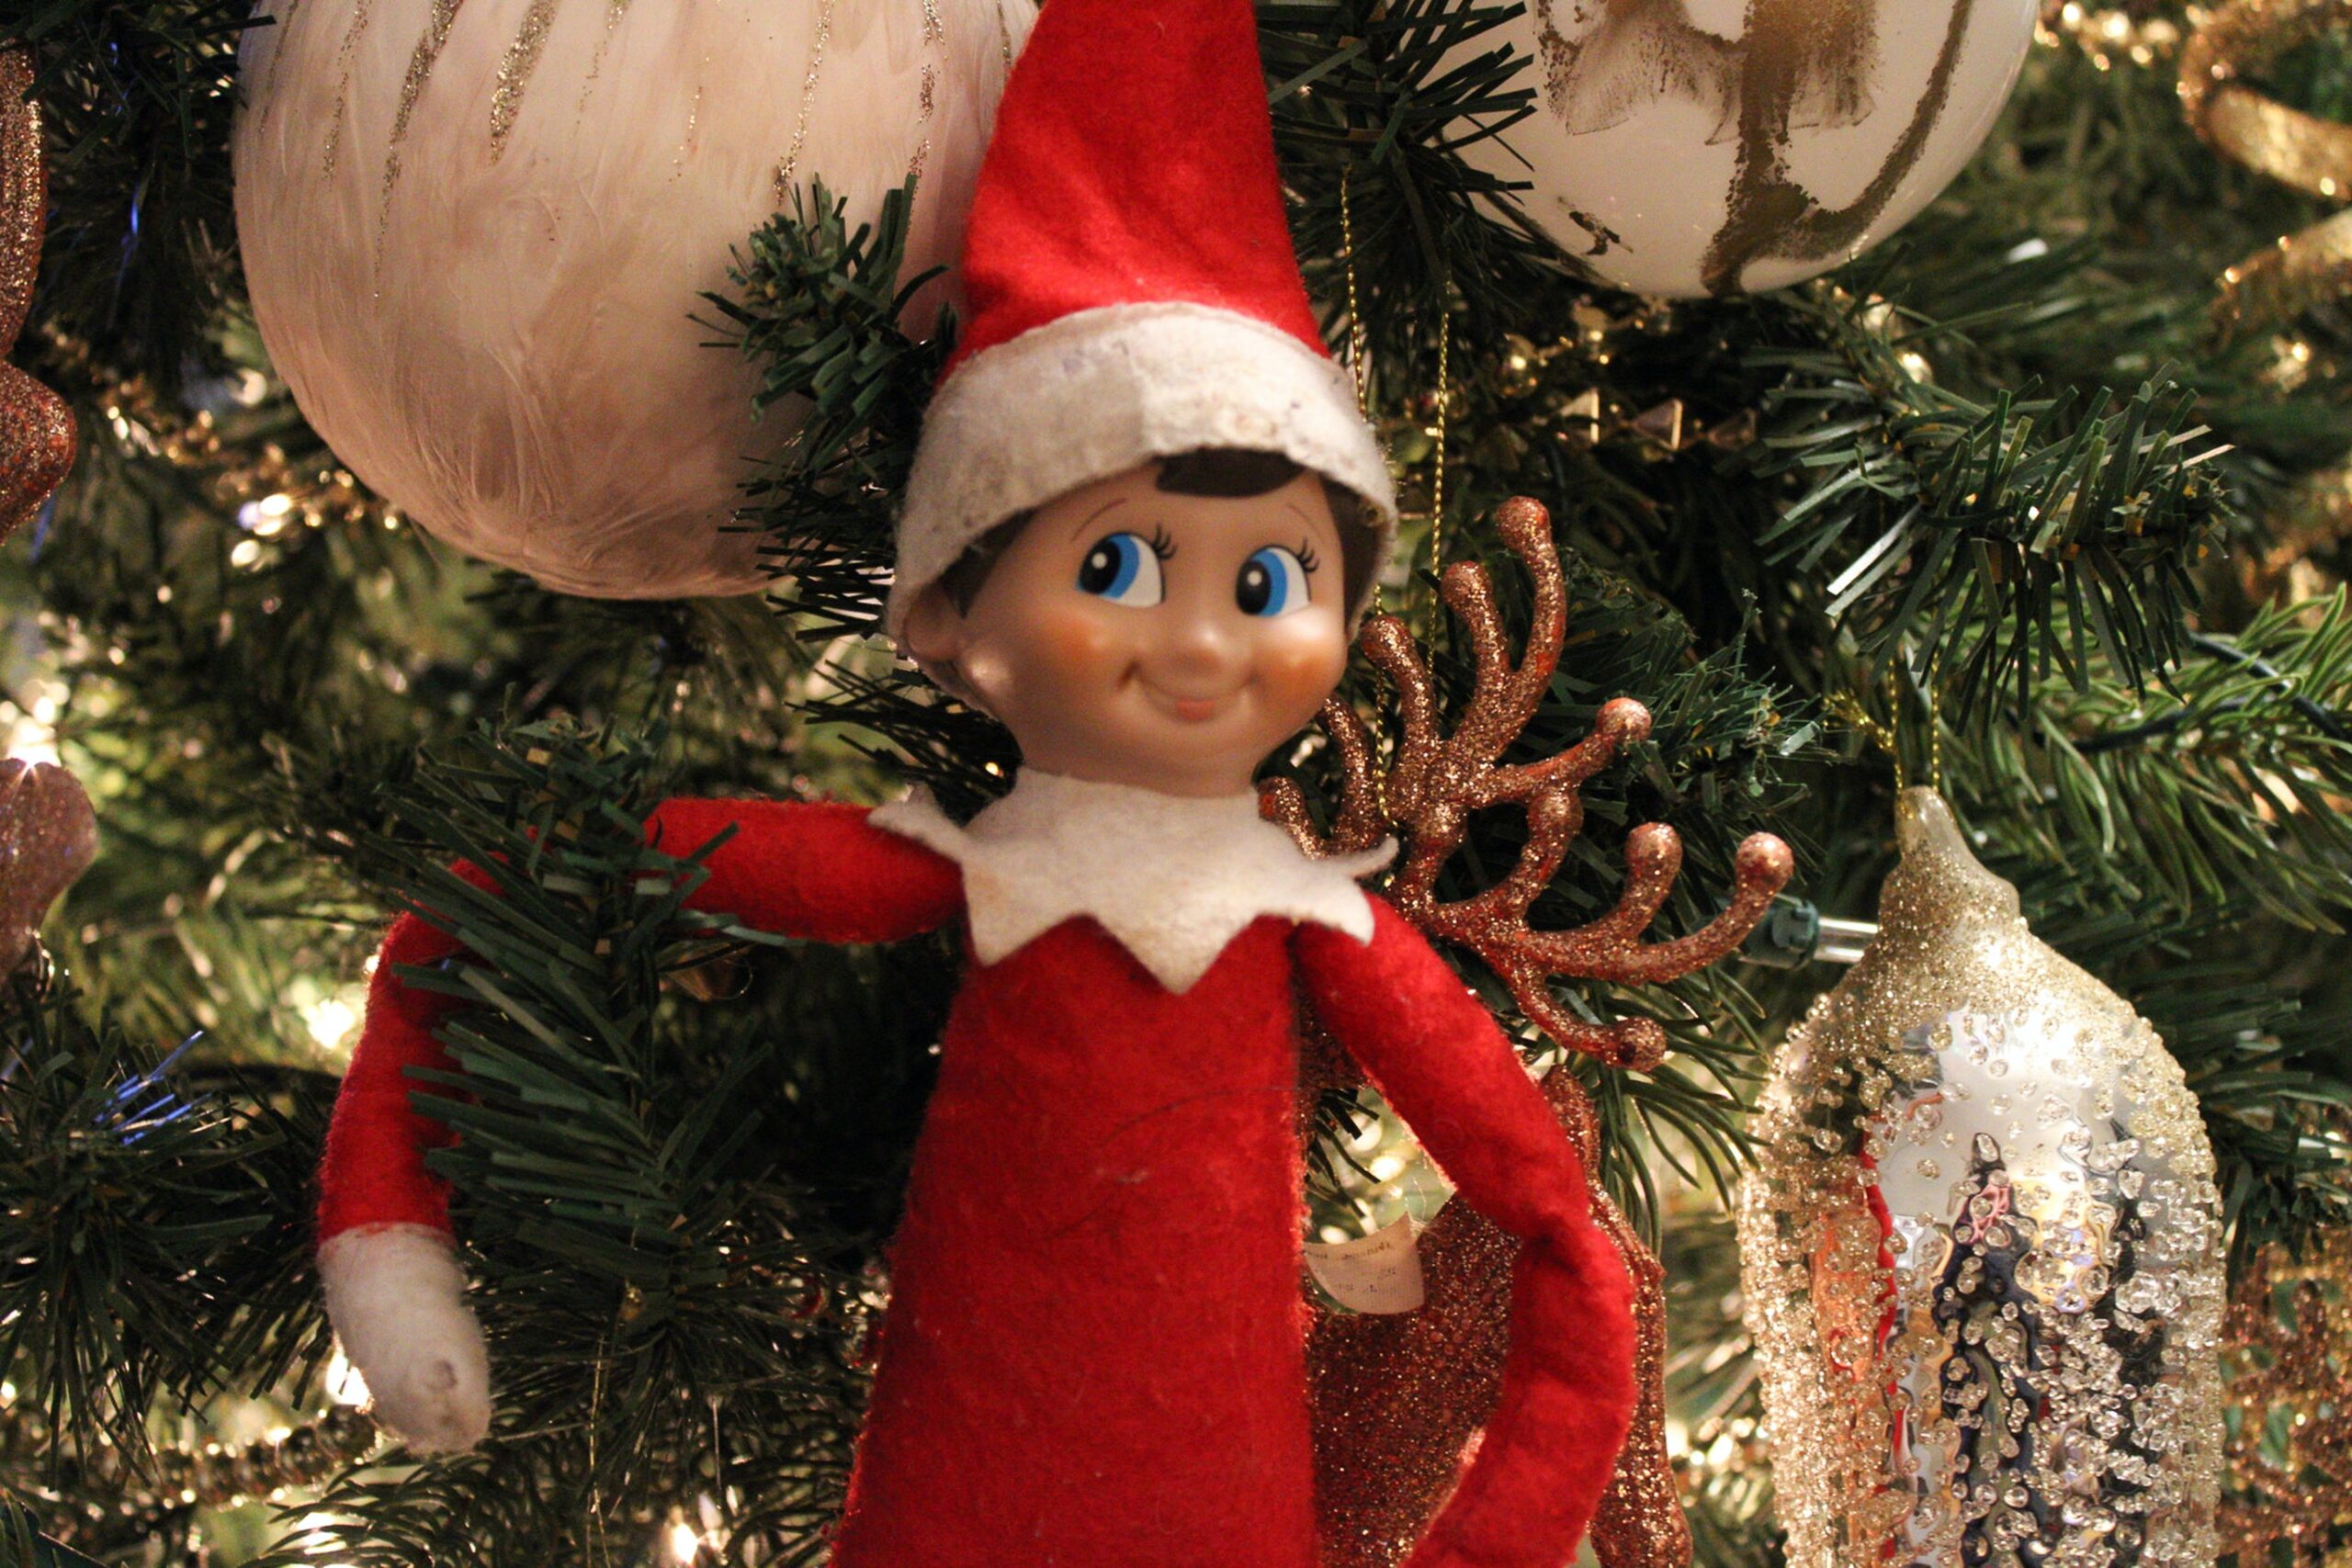 These mischievous little elves have taken over your Christmas tree. Create an Elf on the Shelf Christmas tree theme by letting these little guys wander and roam your tree. Have the kids find them using clues on Christmas day for a fun activity. Pictured: An elf on the shelf in a Christmas tree.